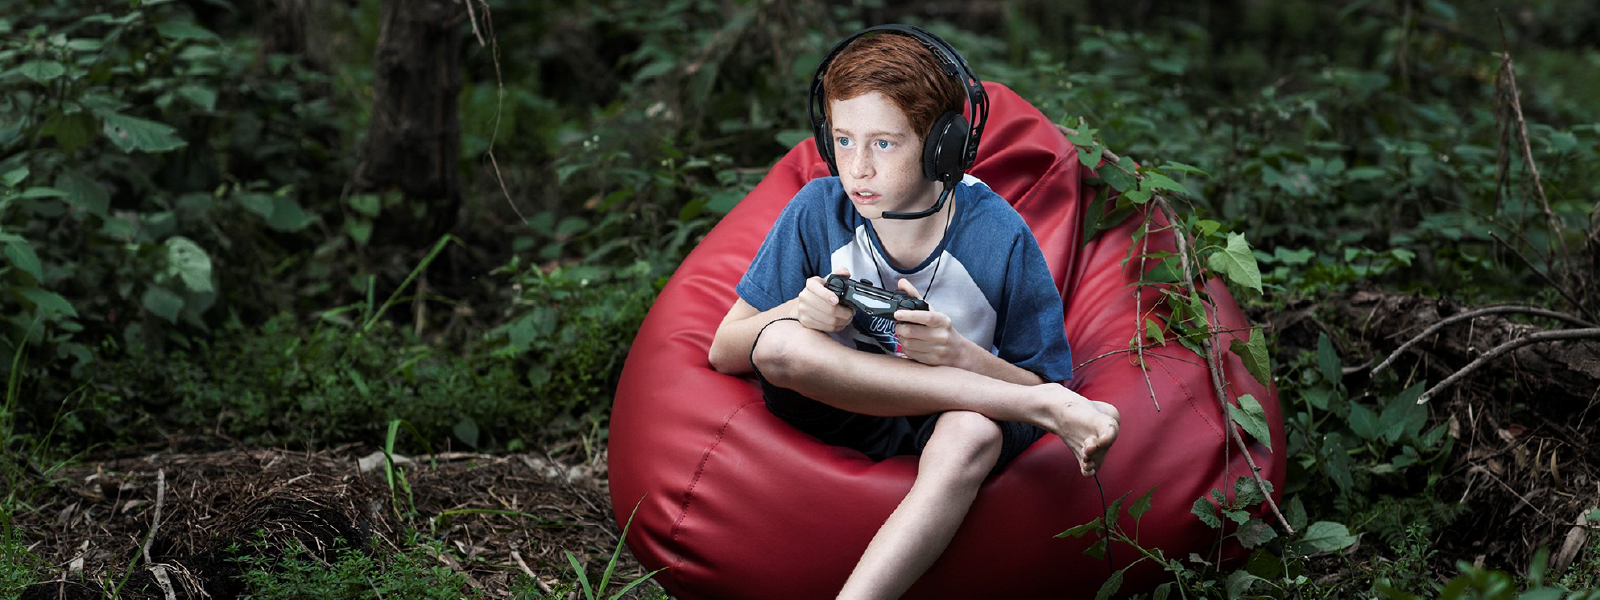 A child sits on a bright red beanbag in a forest. They are using a Playstation controller with different game cards on the forest floor around them. 